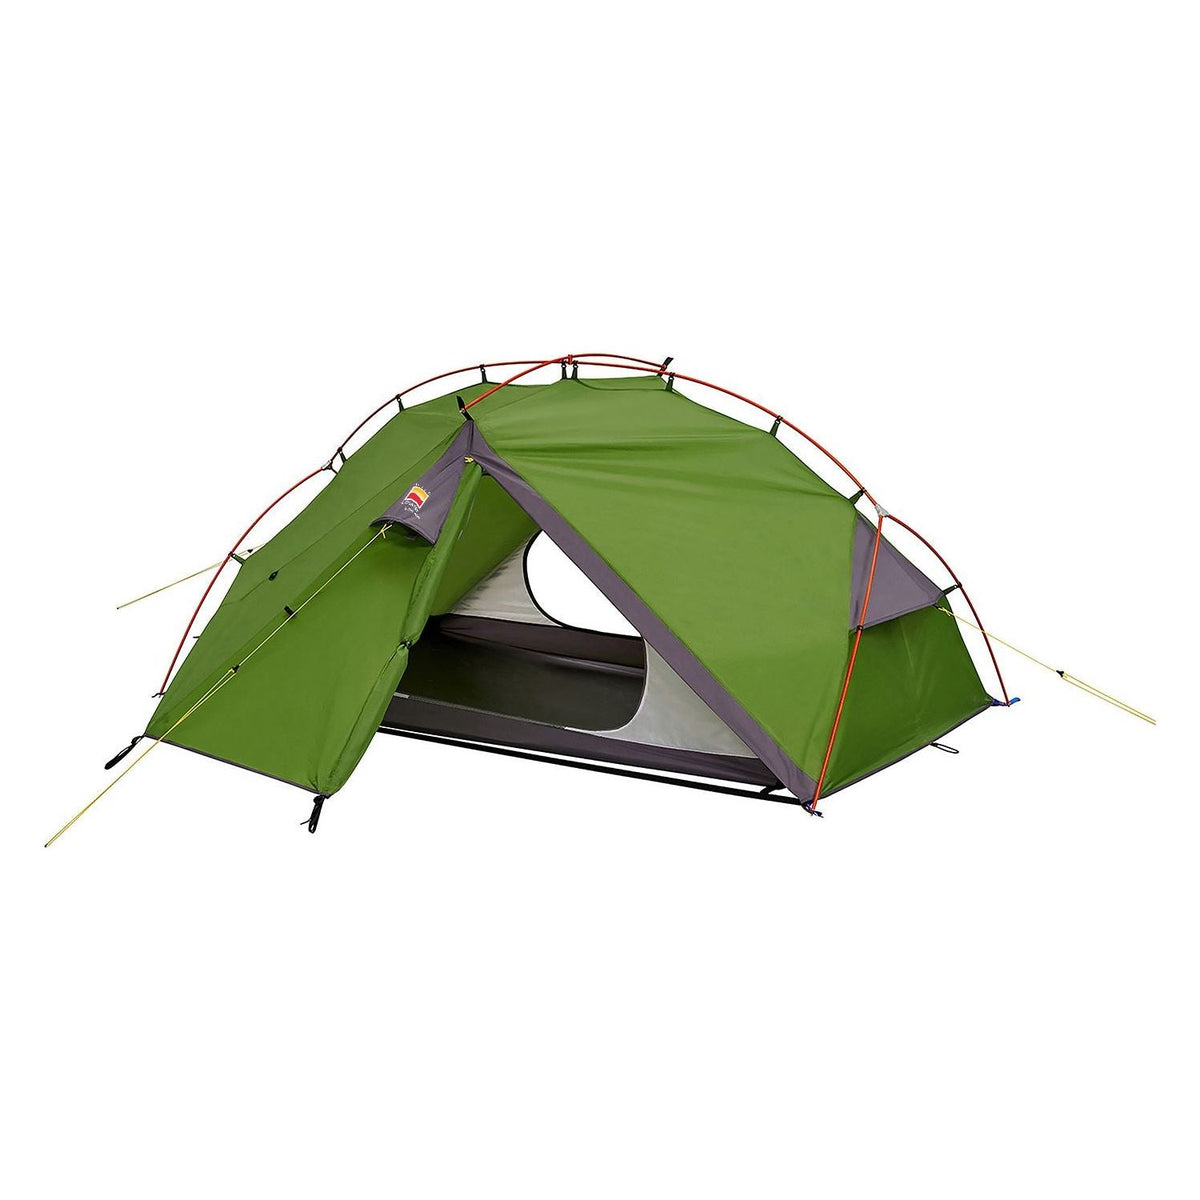 Wild Country Panacea 2 Two-Person Tent - Green